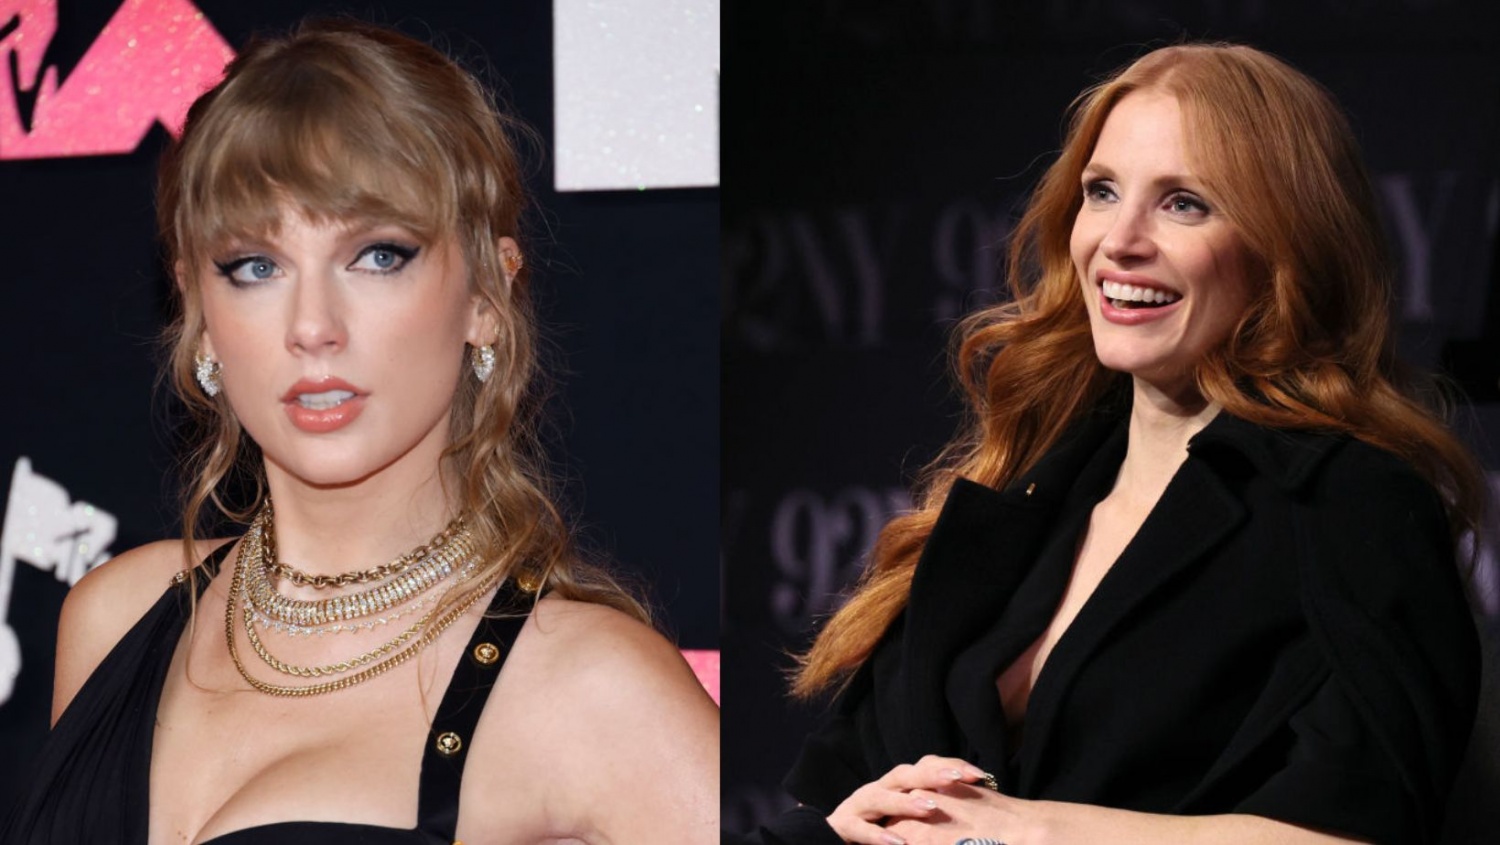 How Taylor Swift Helped Jessica Chastain Get Over a Breakup: 'She's So Sweet'